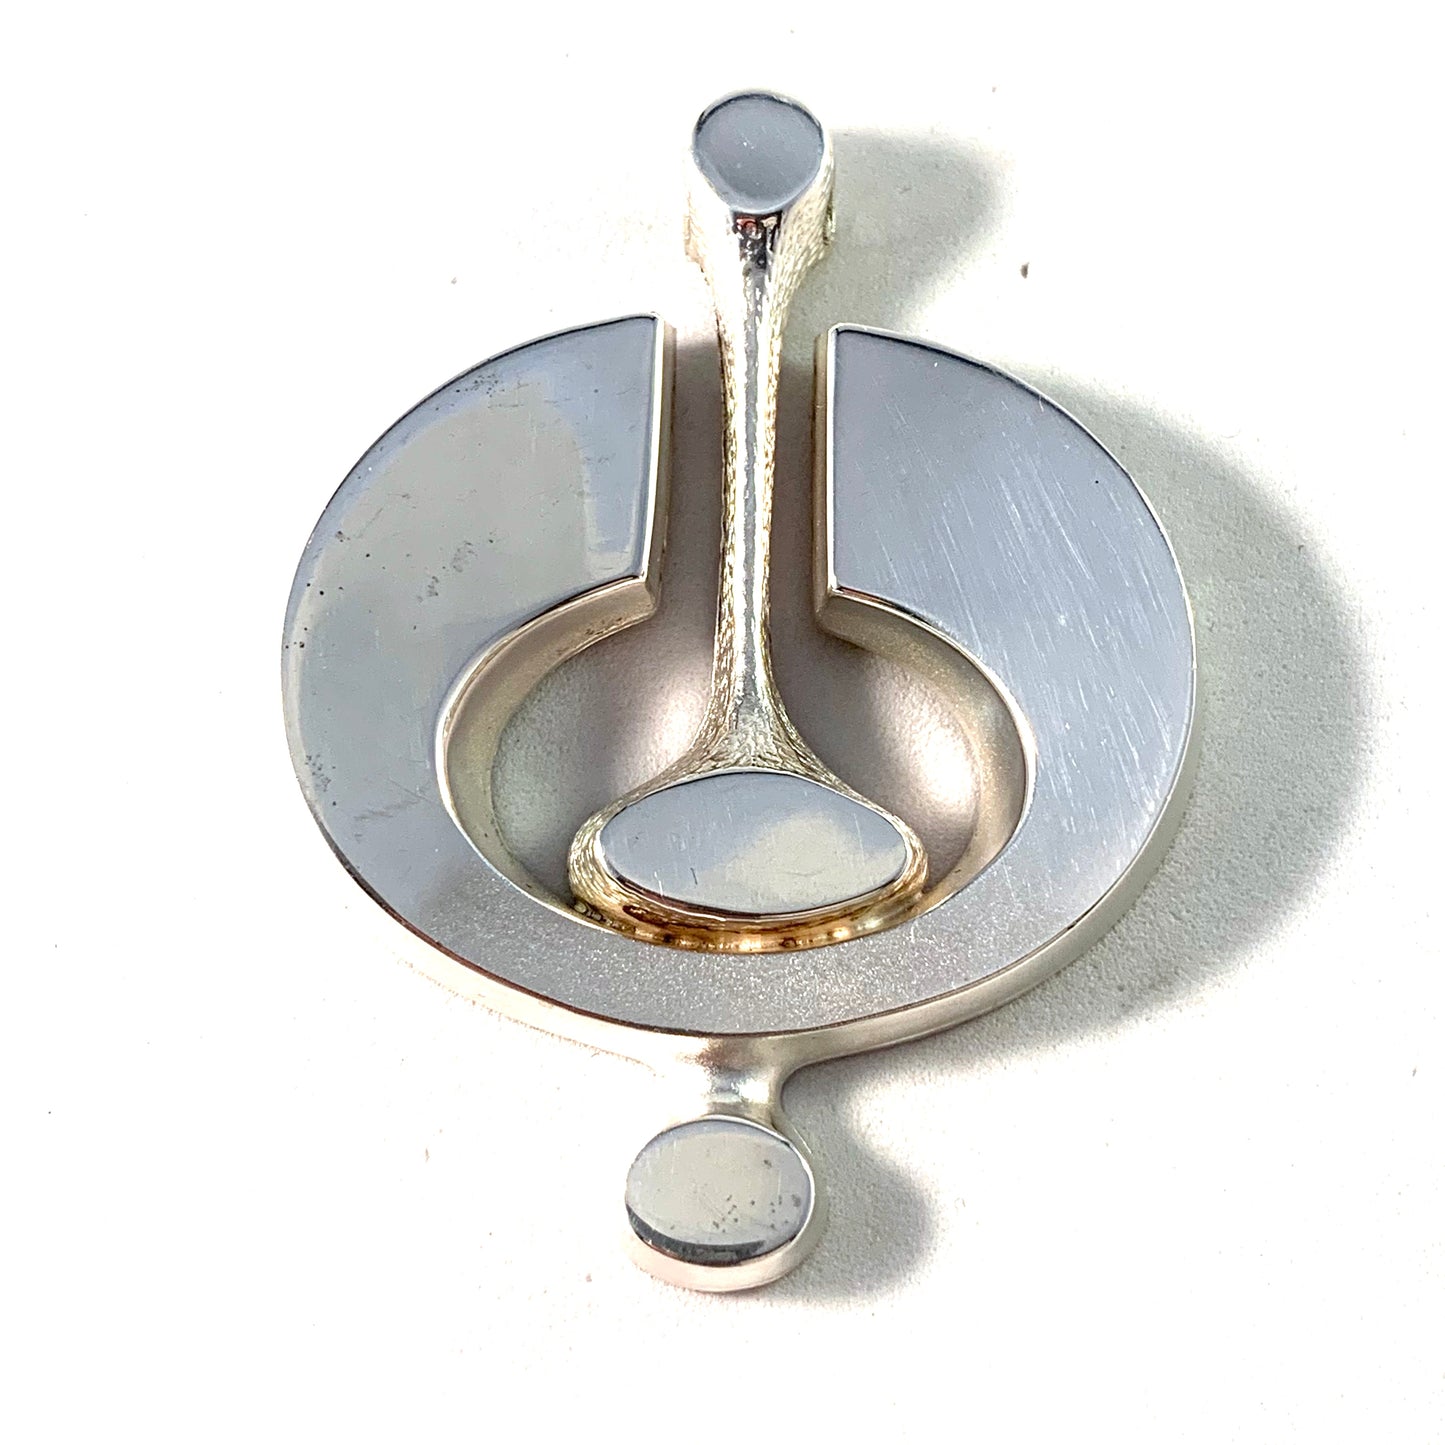 Jorma Laine for Turun Hopea Finland 1974 Bold Modernist Signed Solid Silver Pendant.